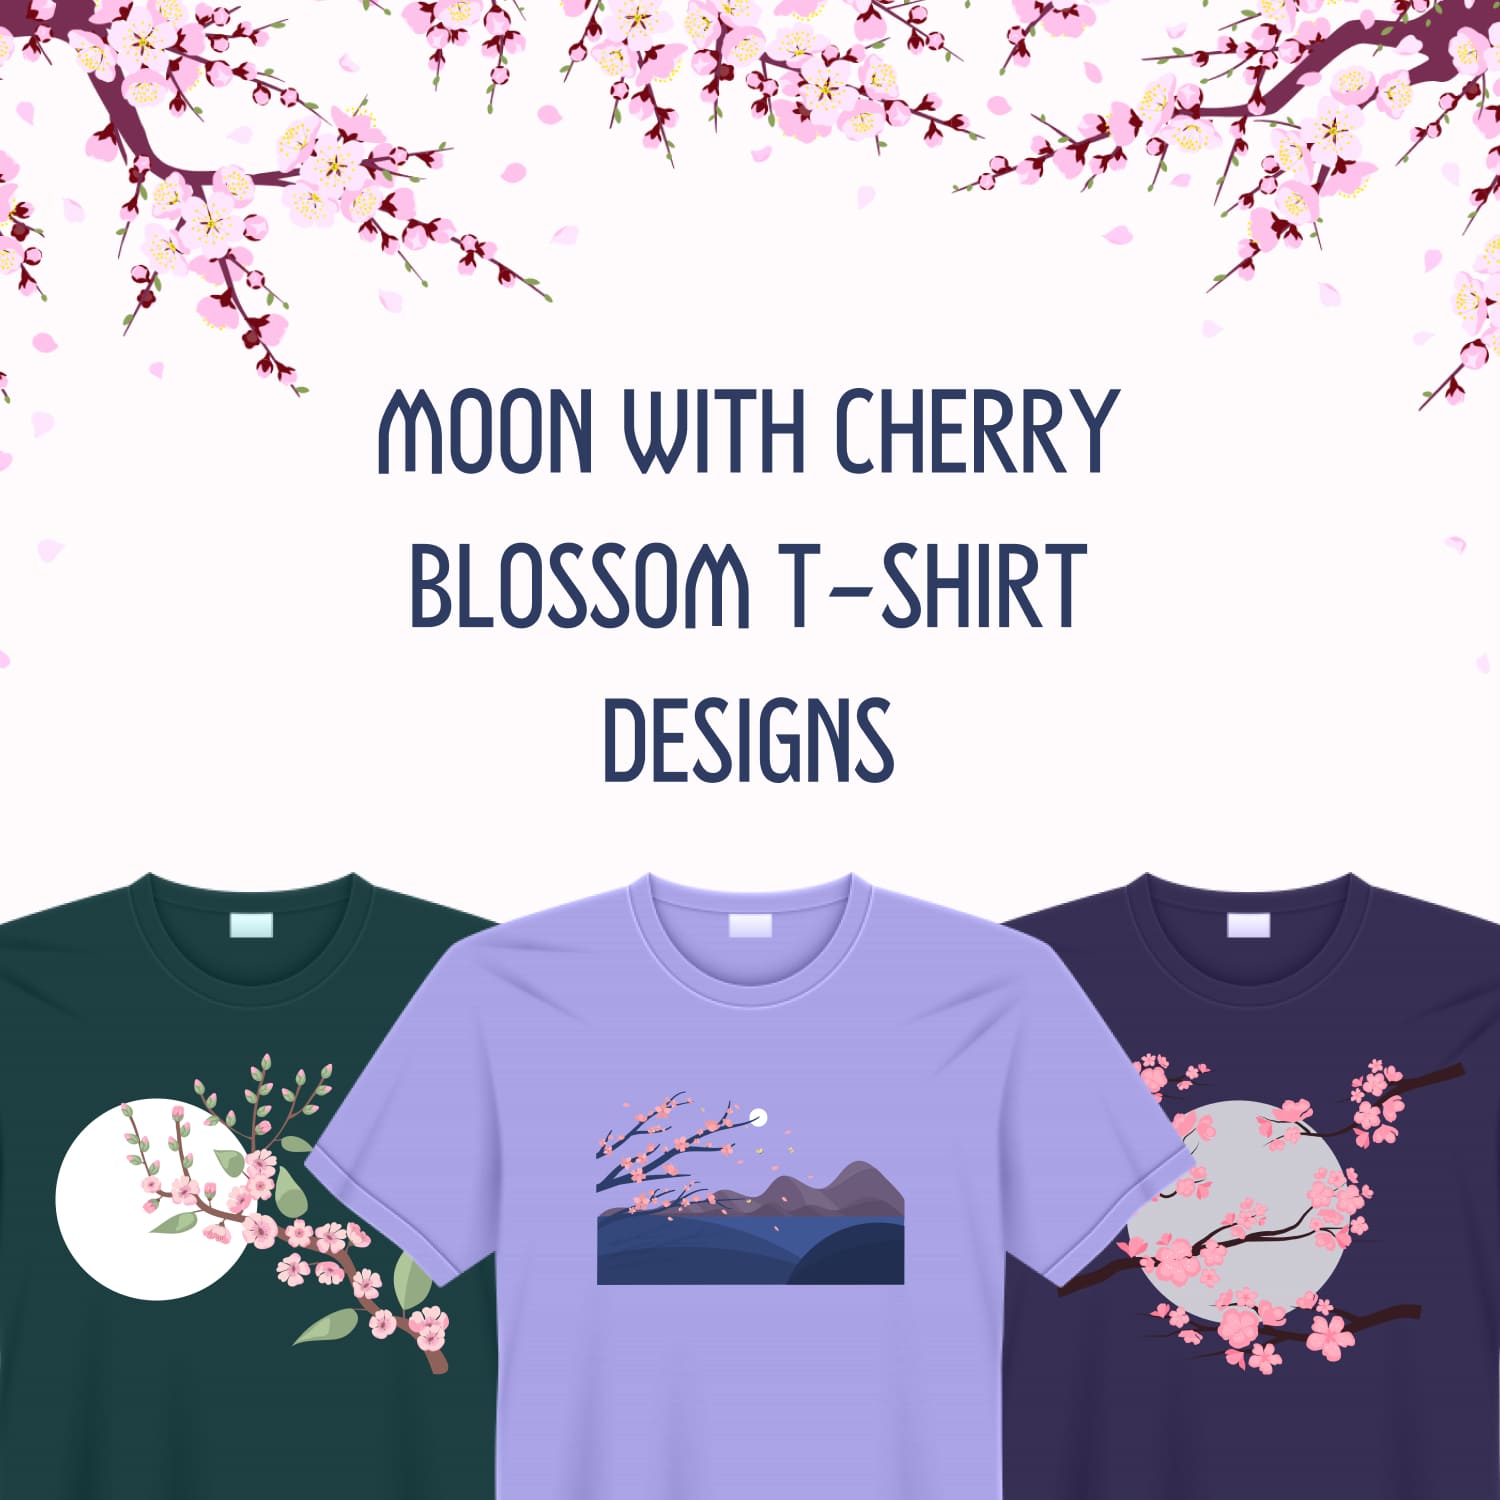 Preview moon with cherry blossom t shirt designs.